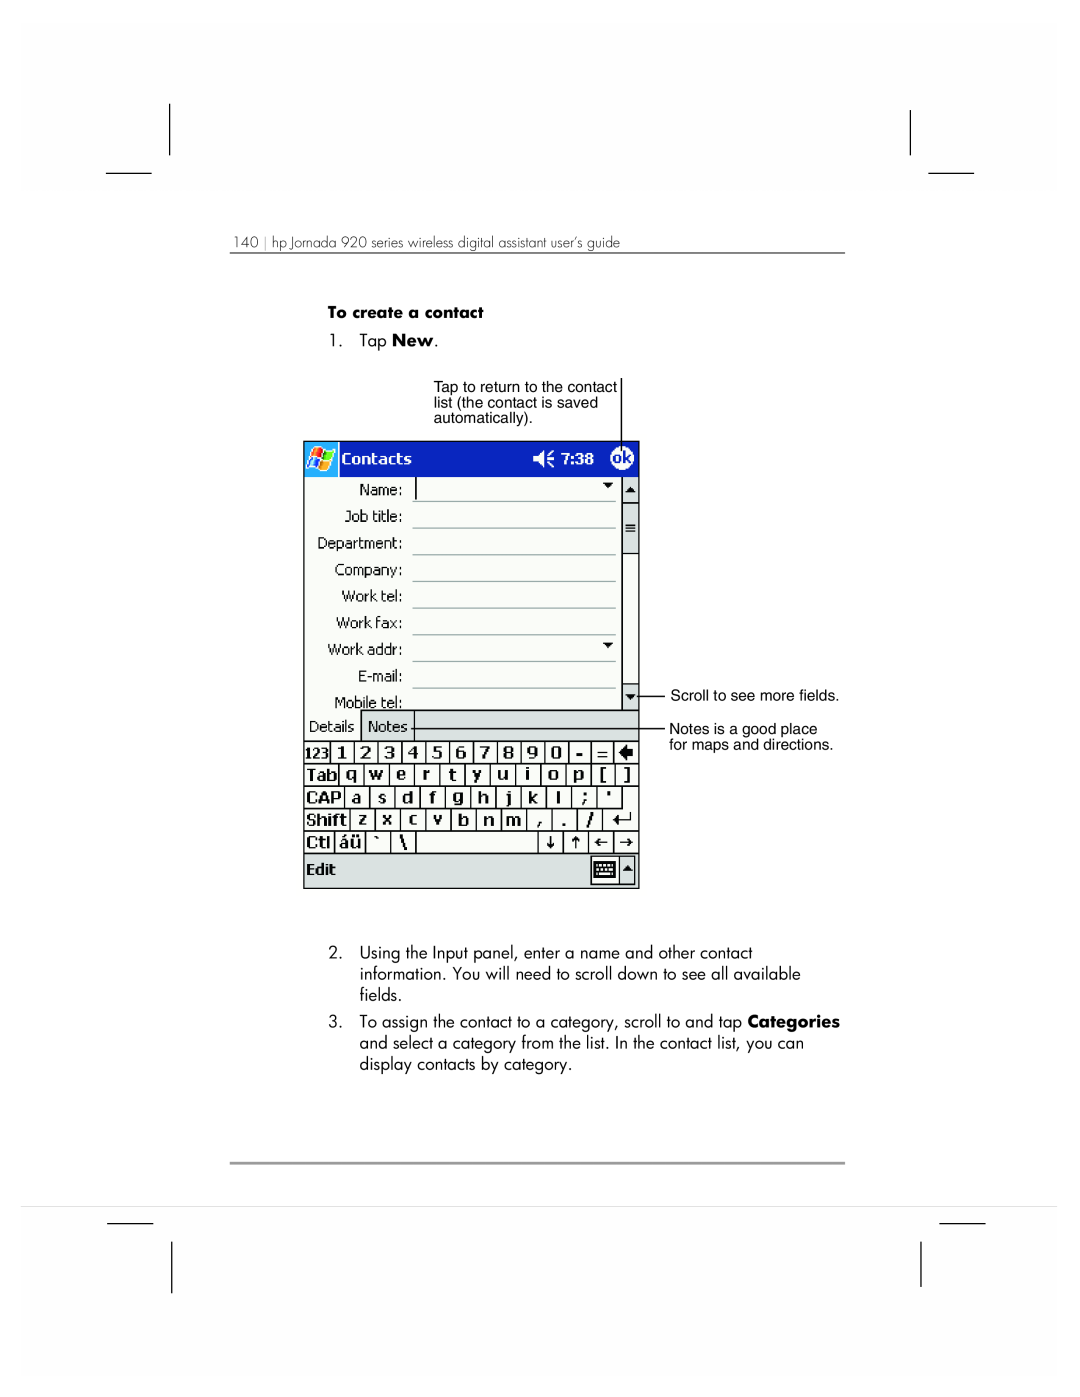 HP 920 manual To create a contact, Tap to return to the contact list the contact is saved automatically 